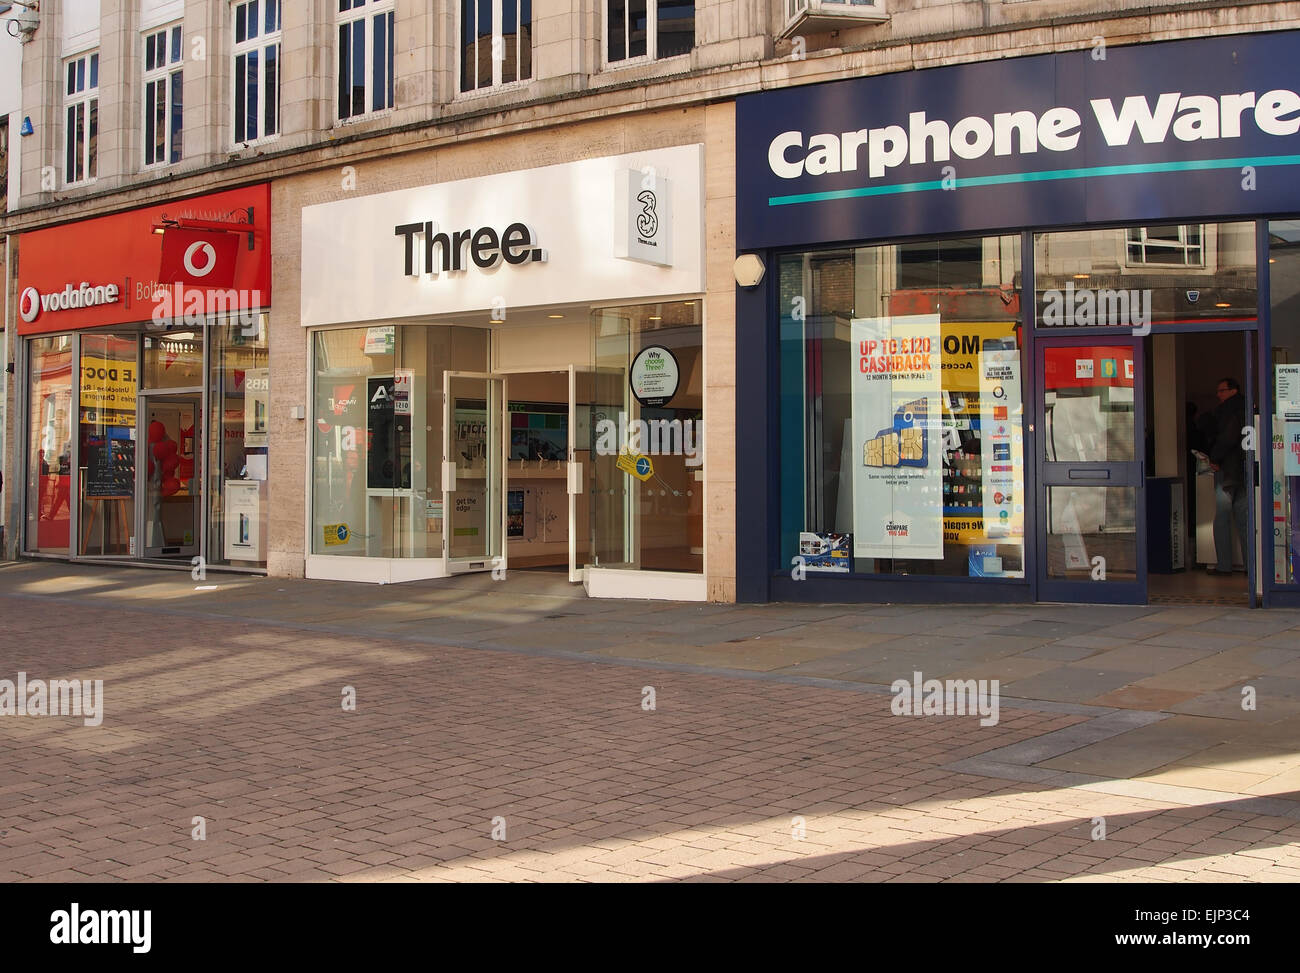 Shops selling mobile phones - Vodaphone, Three and Carphone Warehouse all together on a Bolton street Lancashire, UK. Stock Photo